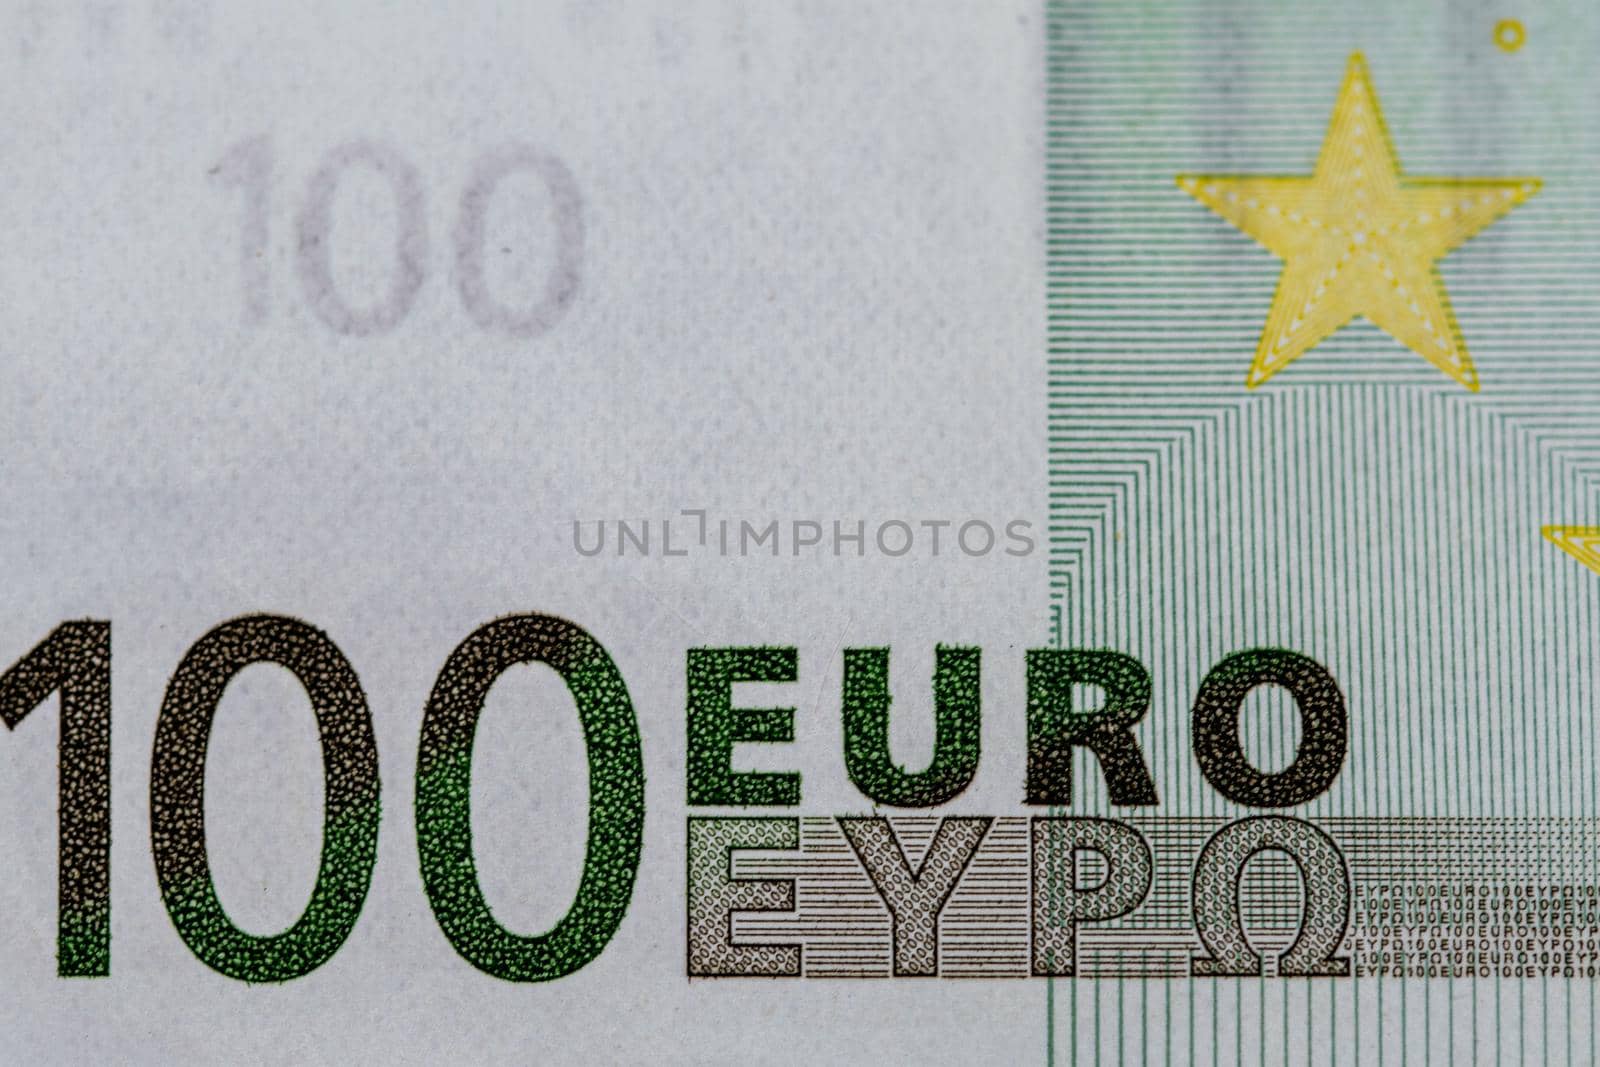 detail of the 100 euro banknote by carfedeph